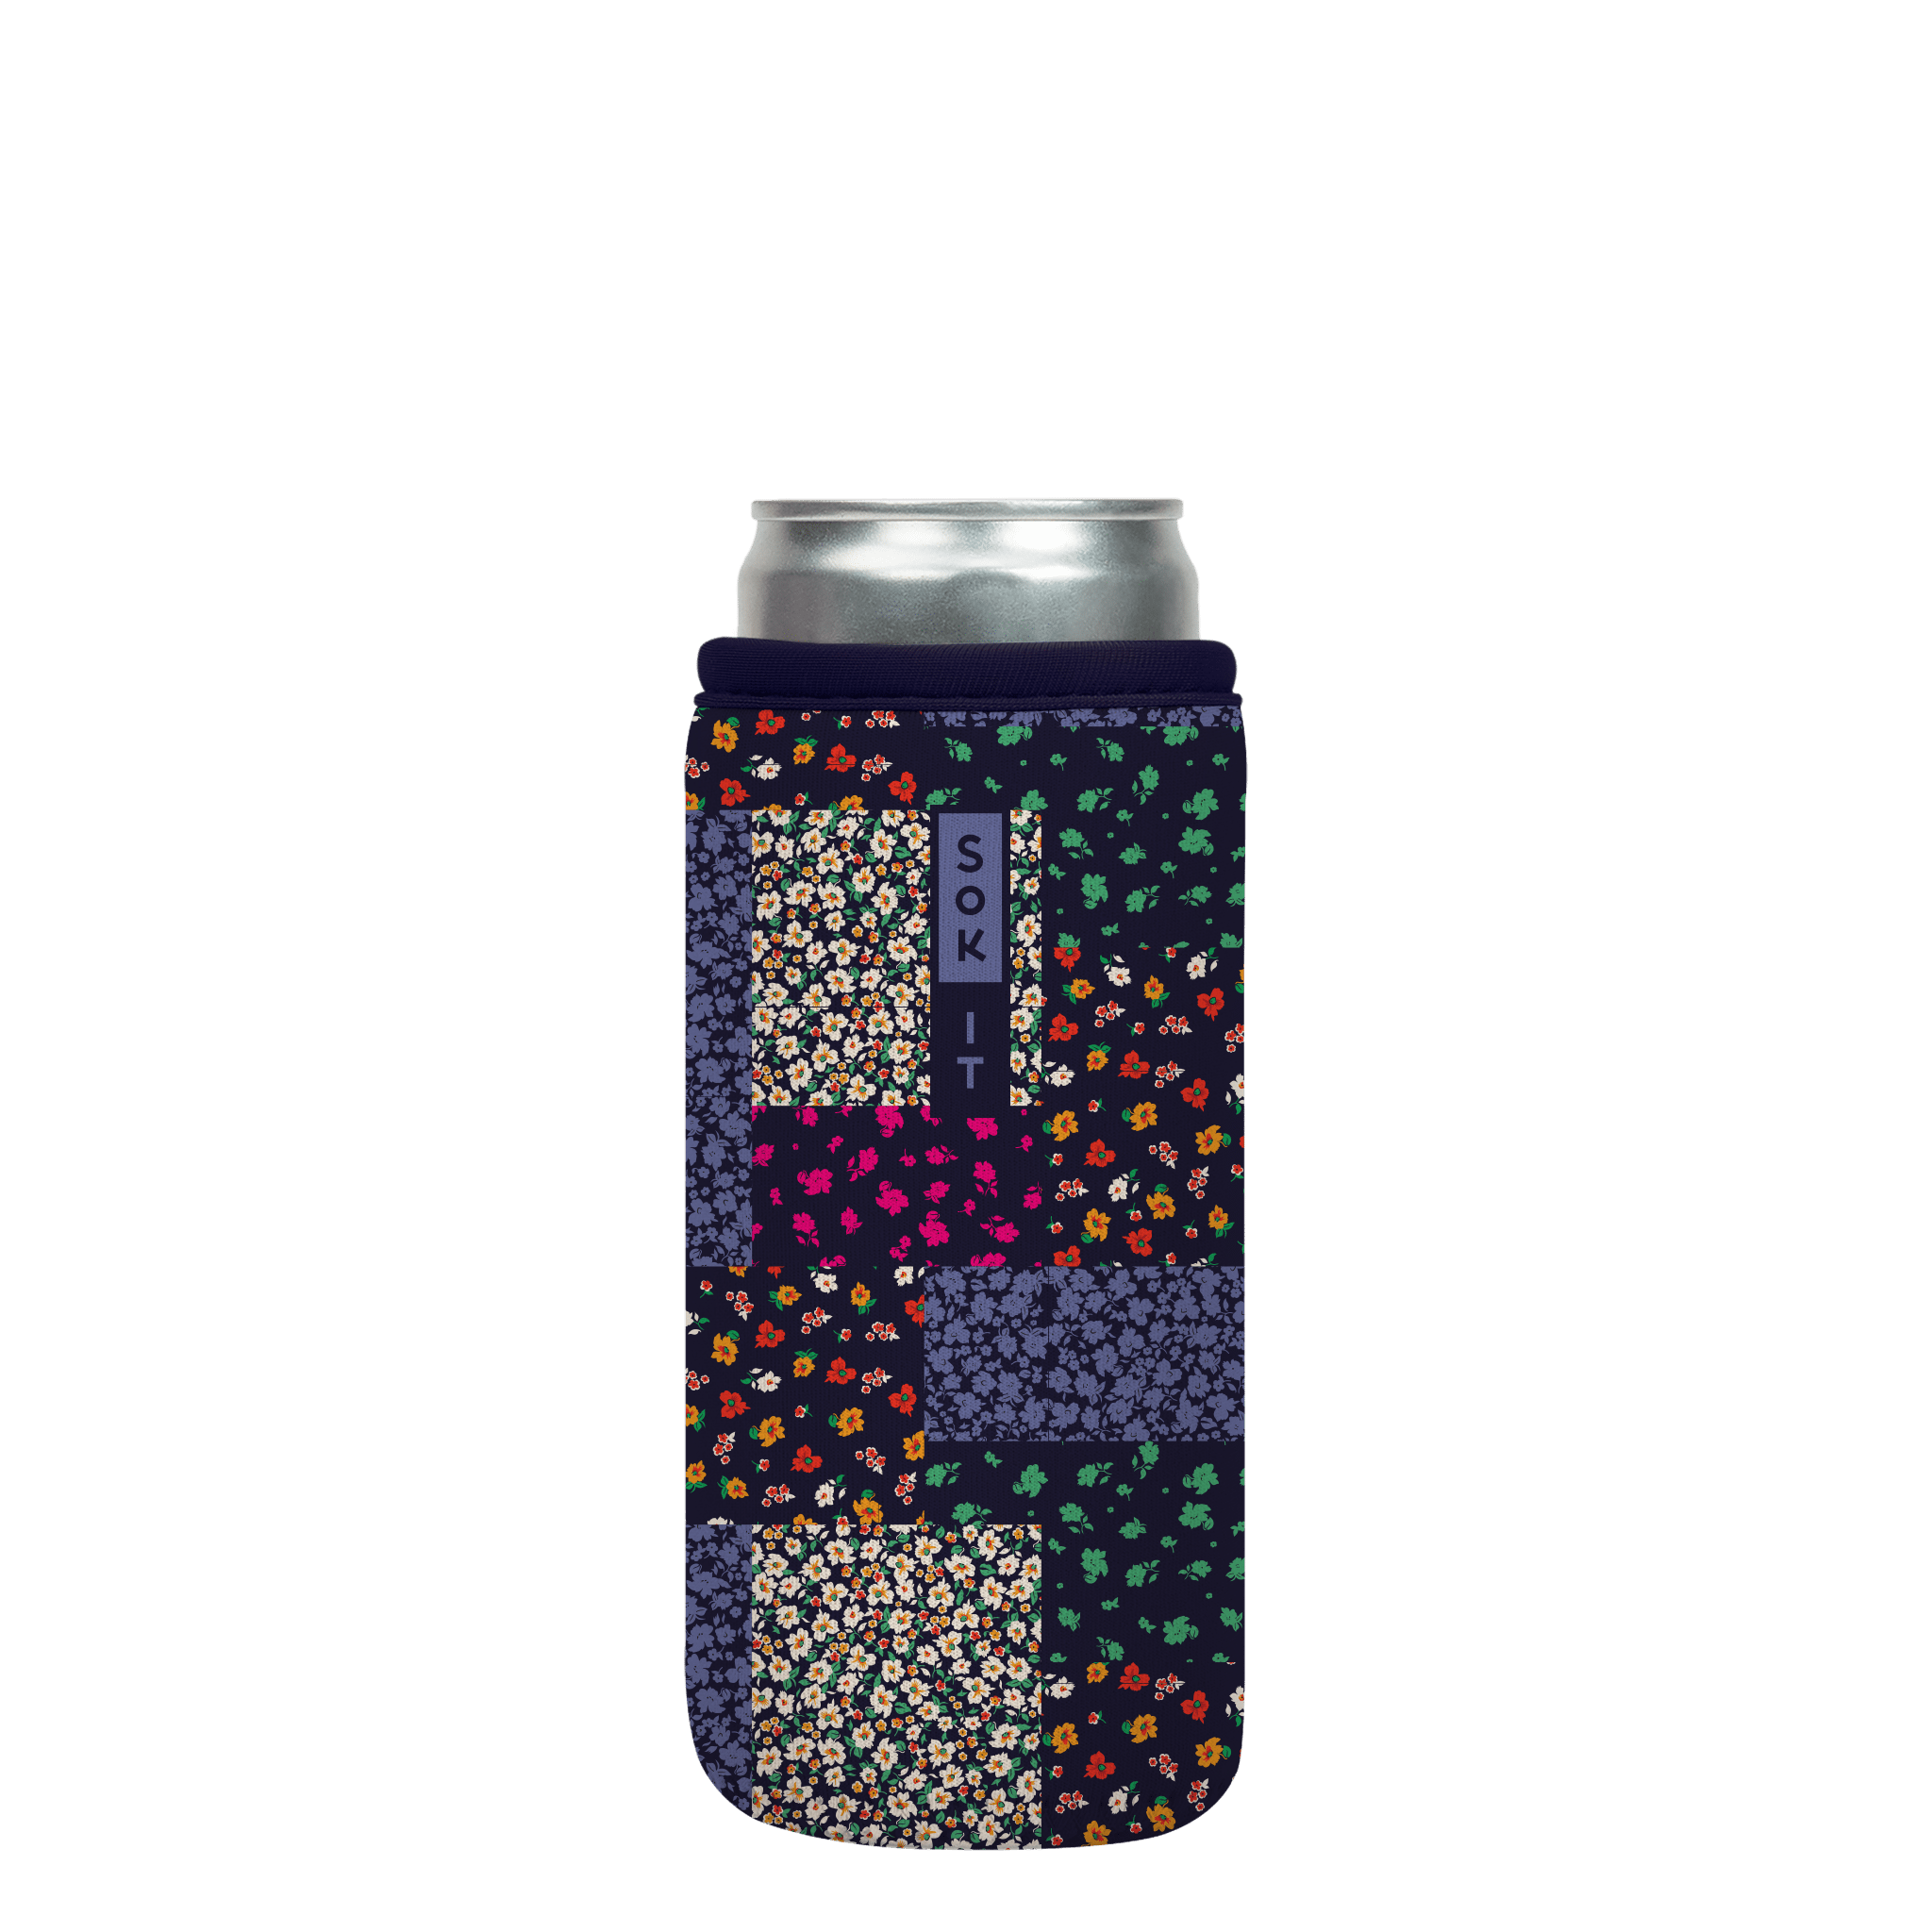 CanSok Flower Patch 12oz Slim Can